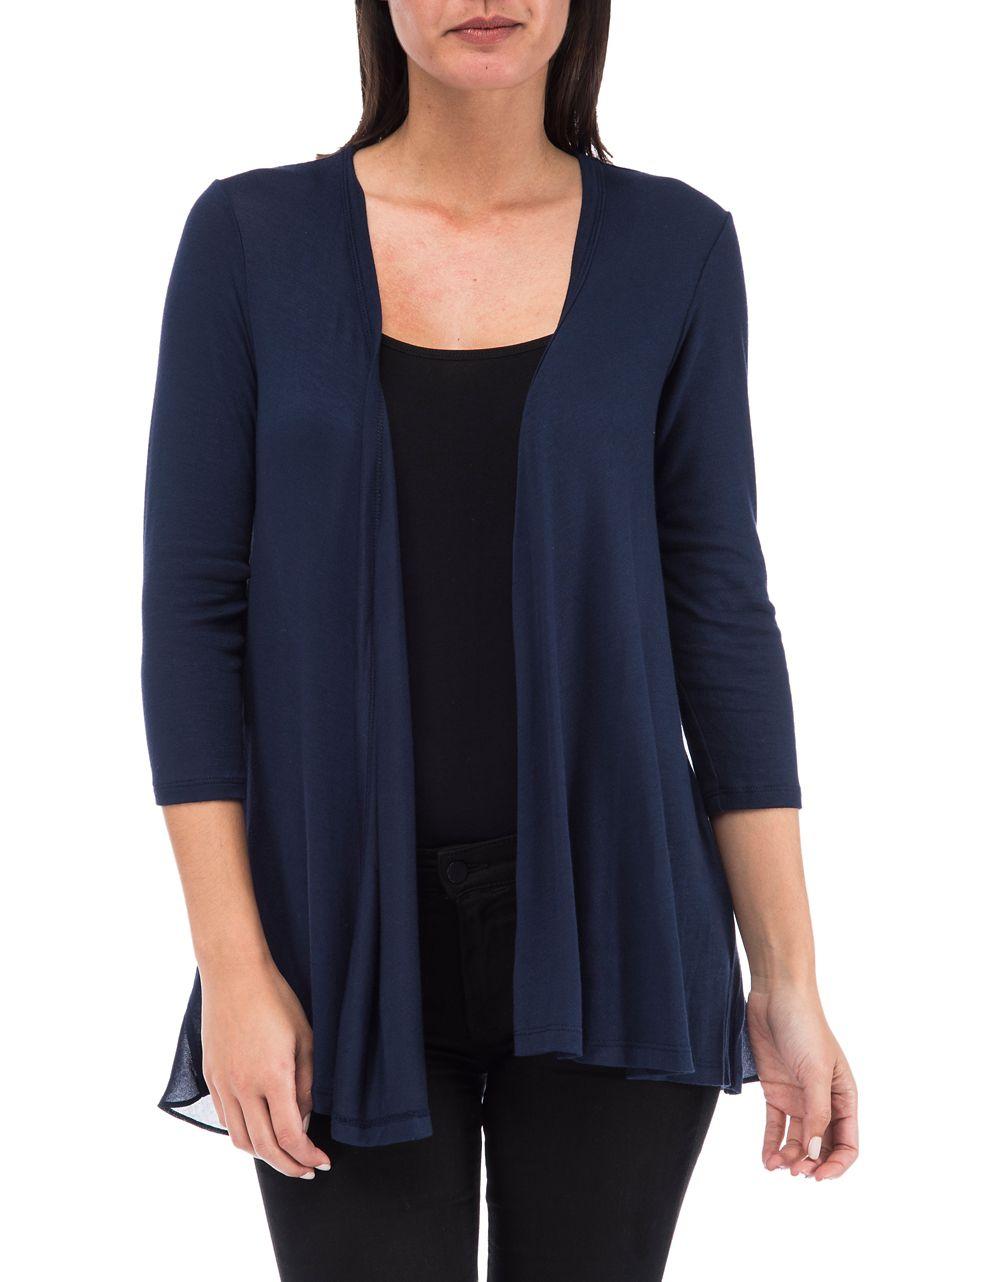 Lyst - B collection by bobeau Open Front Knit Cardigan in Blue